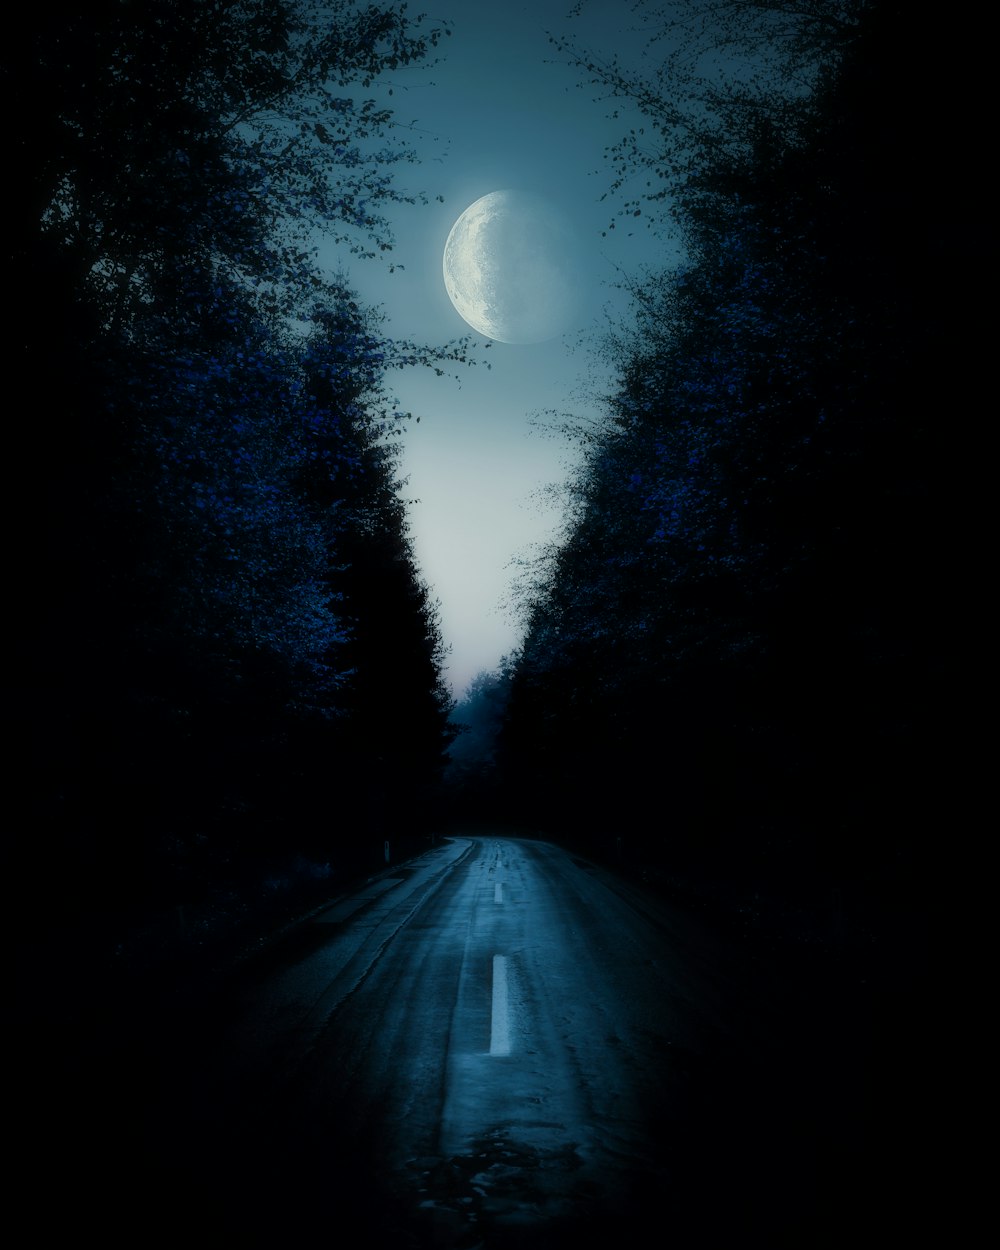 a dark road with trees and a half moon in the sky